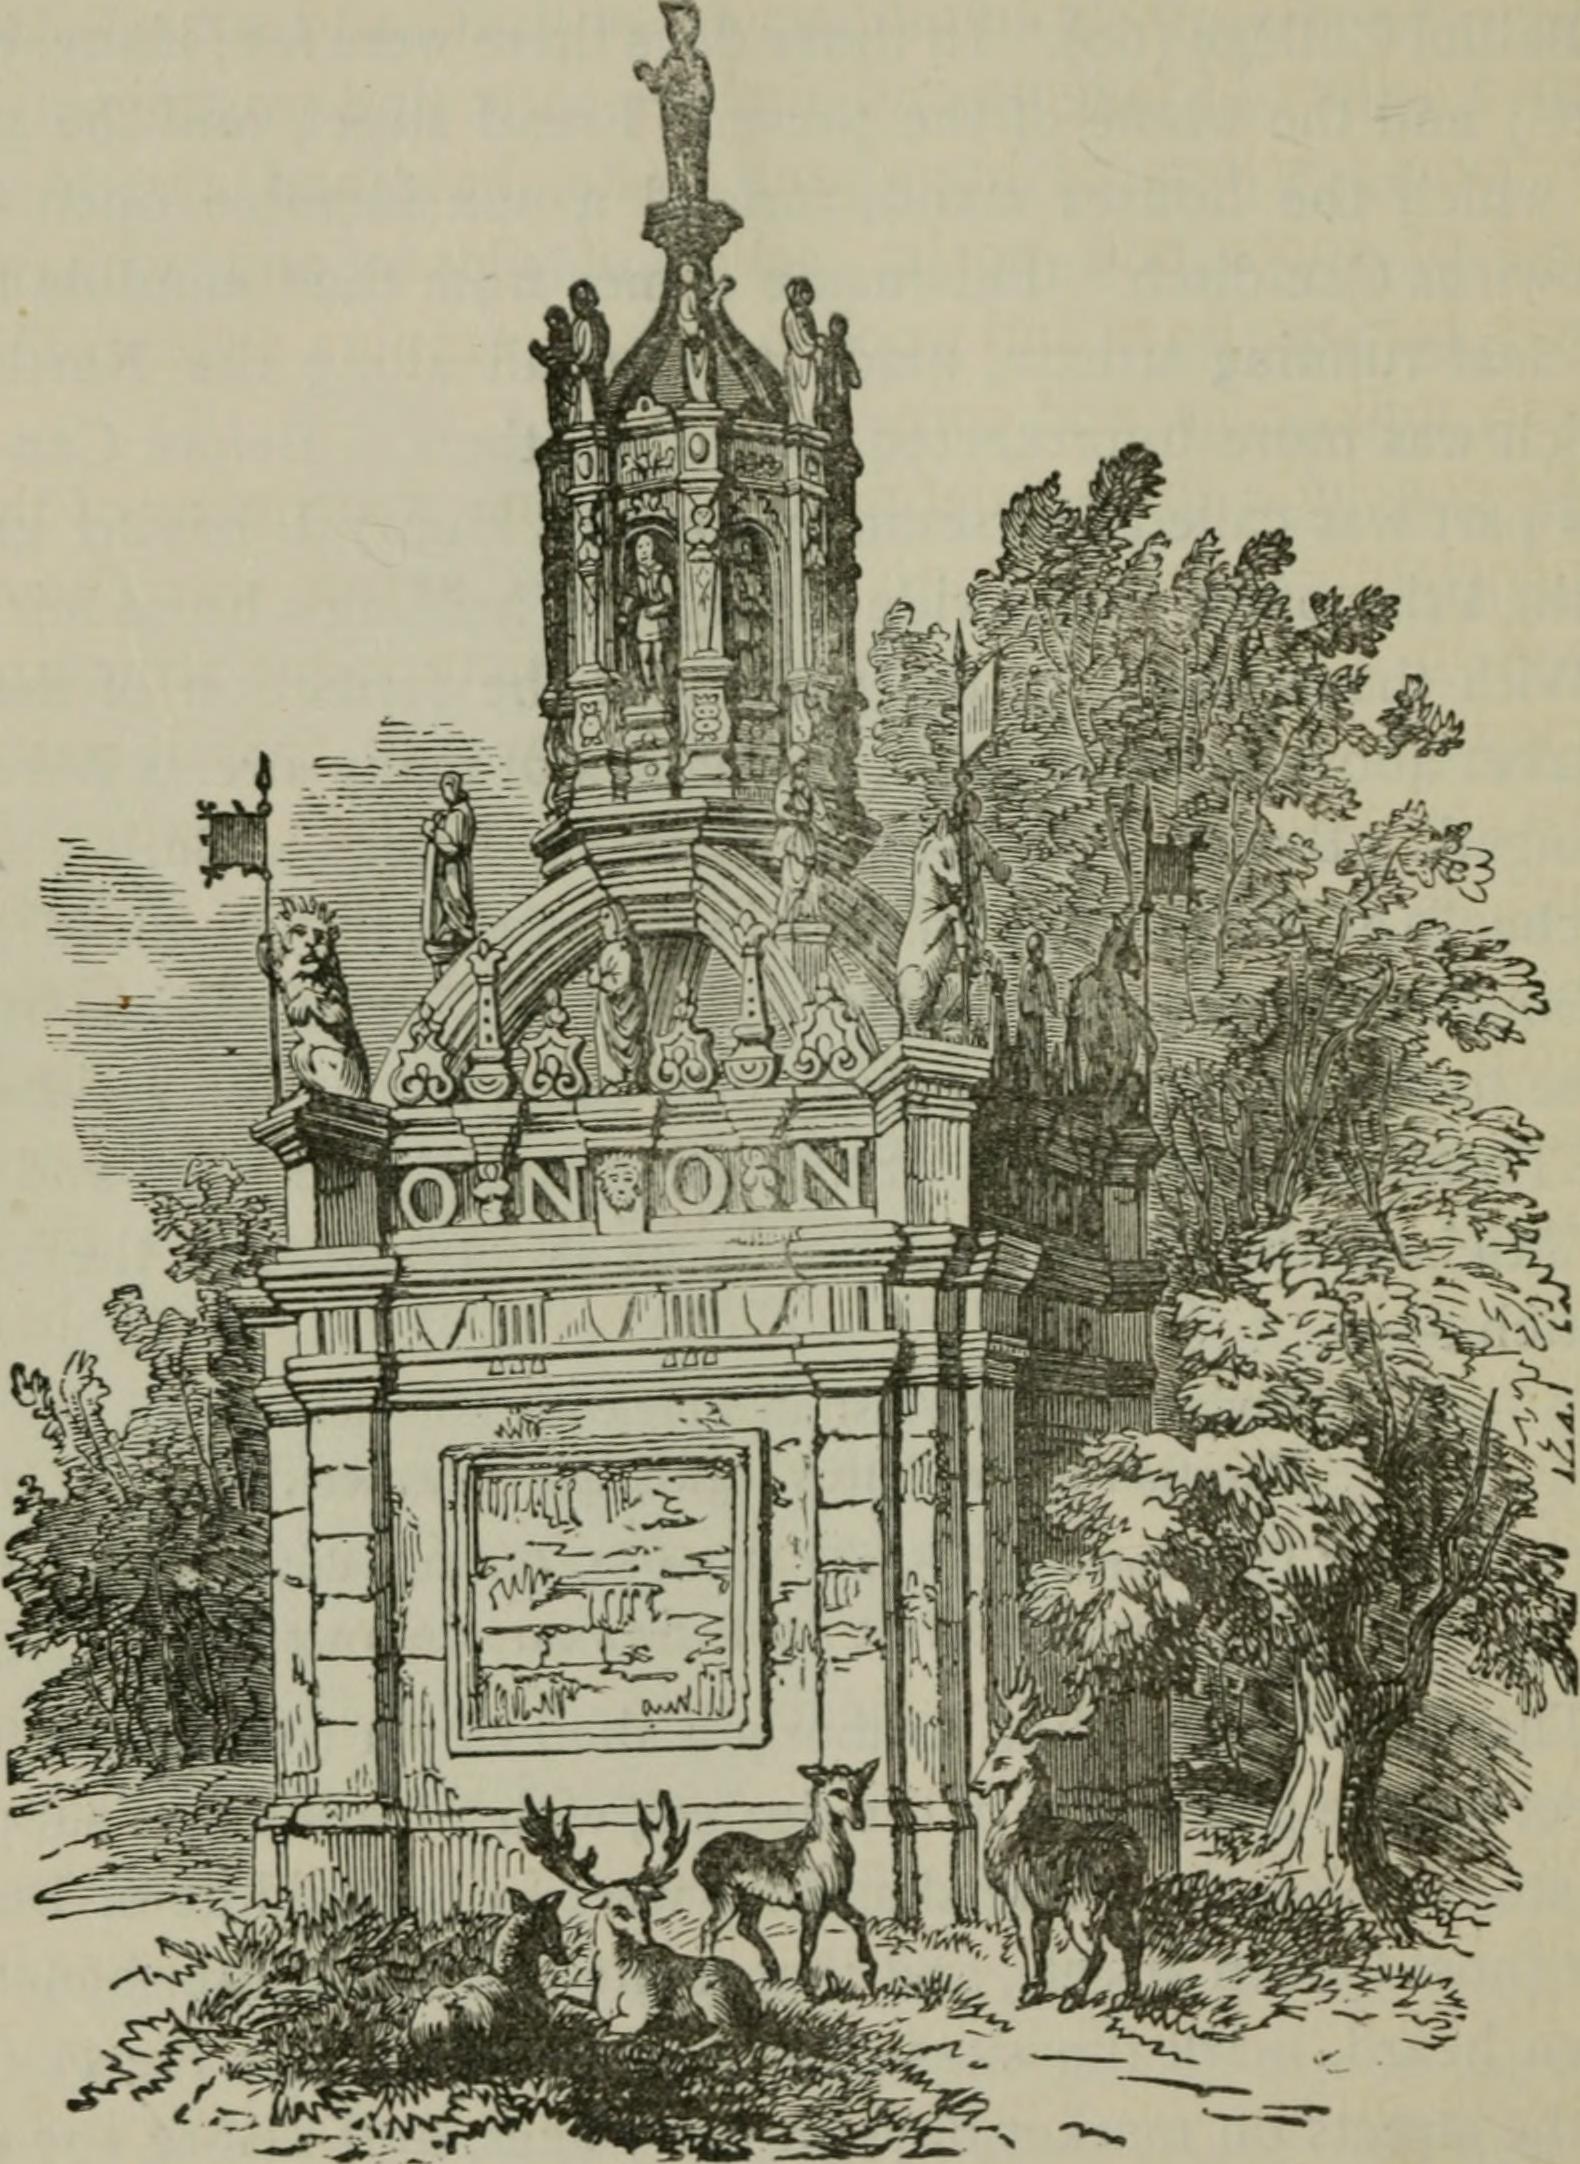 Carfax Conduit at Nuneham from Alden's Oxford guide (1890)